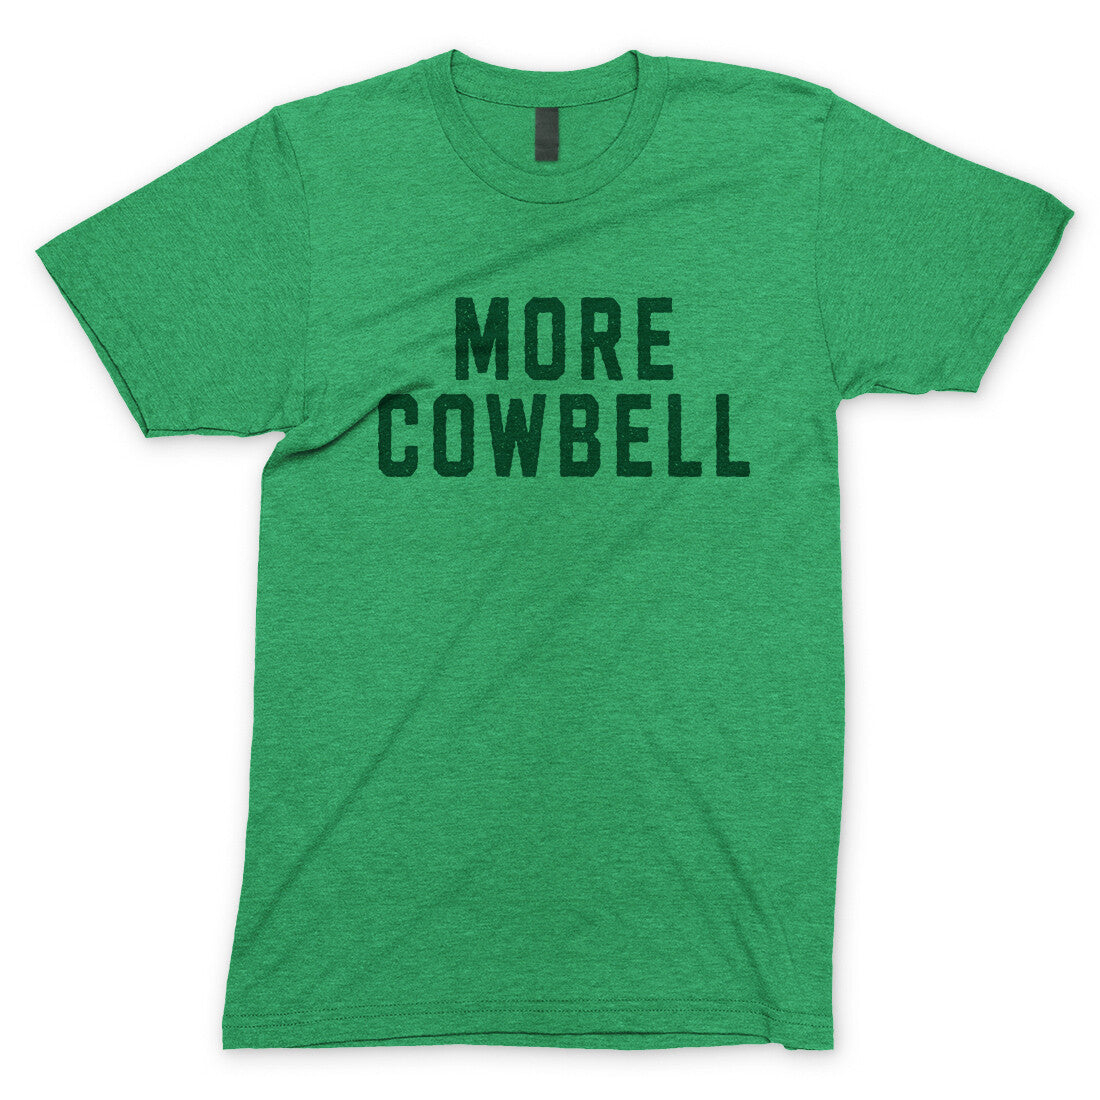 More Cowbell in Heather Irish Green Color